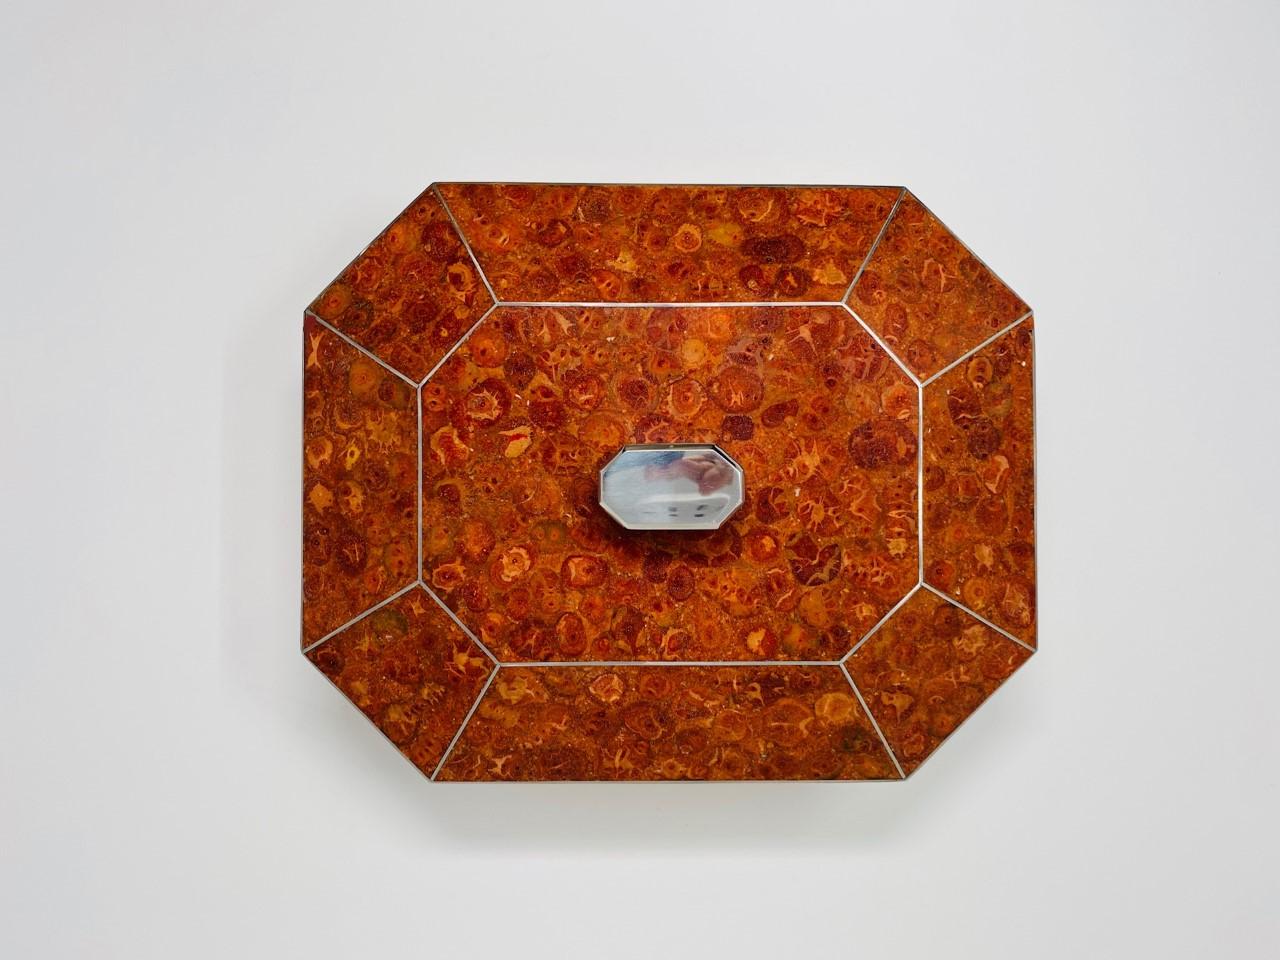 Rare Vintage Red Coral Tile Decorative Box by Maitland Smith In Good Condition For Sale In San Diego, CA